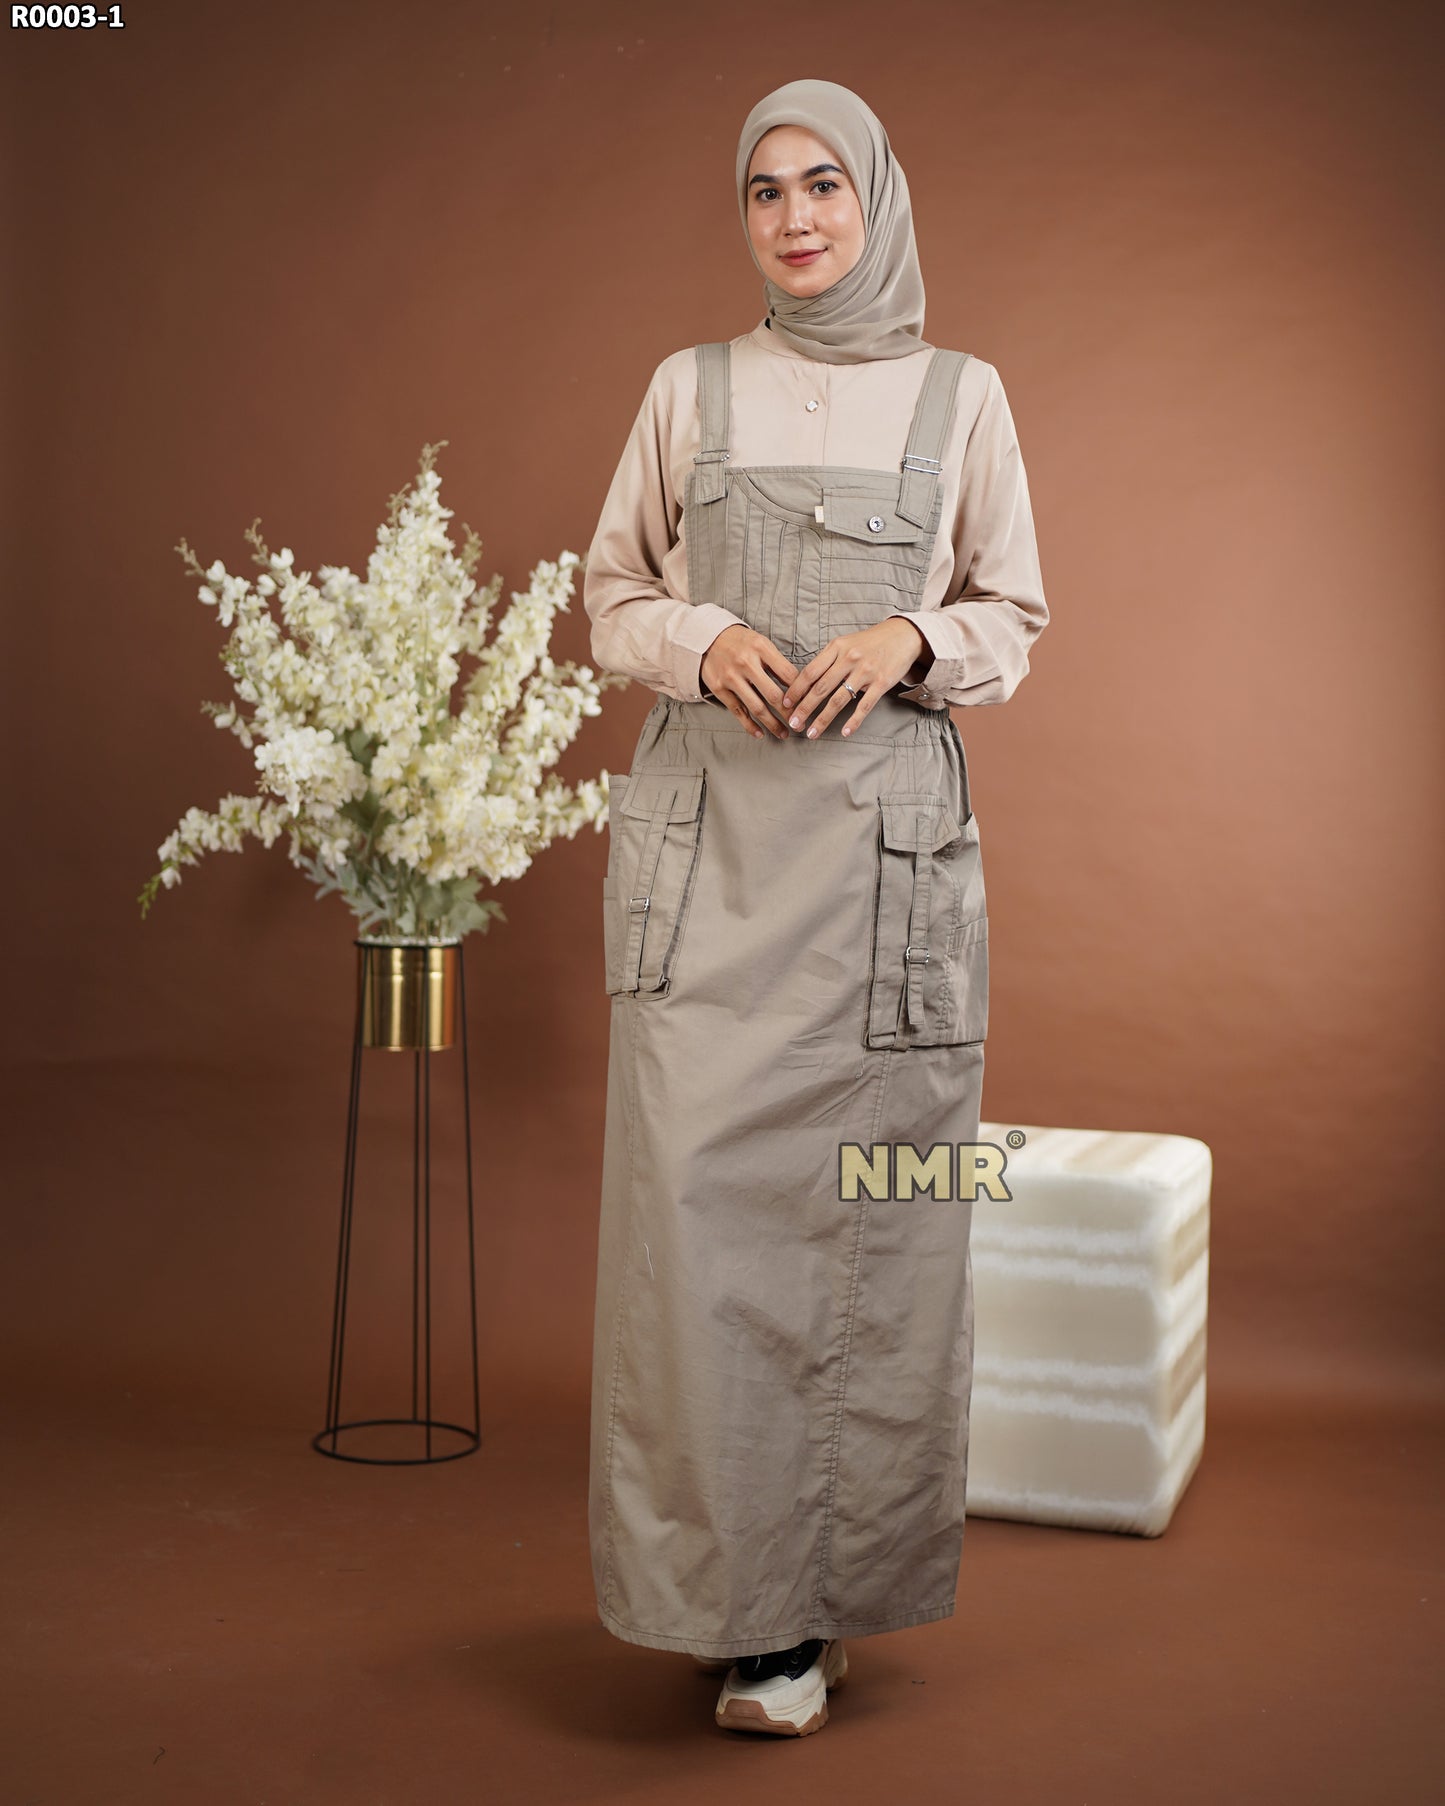 NMR Gamis Jumpsuit Overall Baby Canvas Vol R003-1